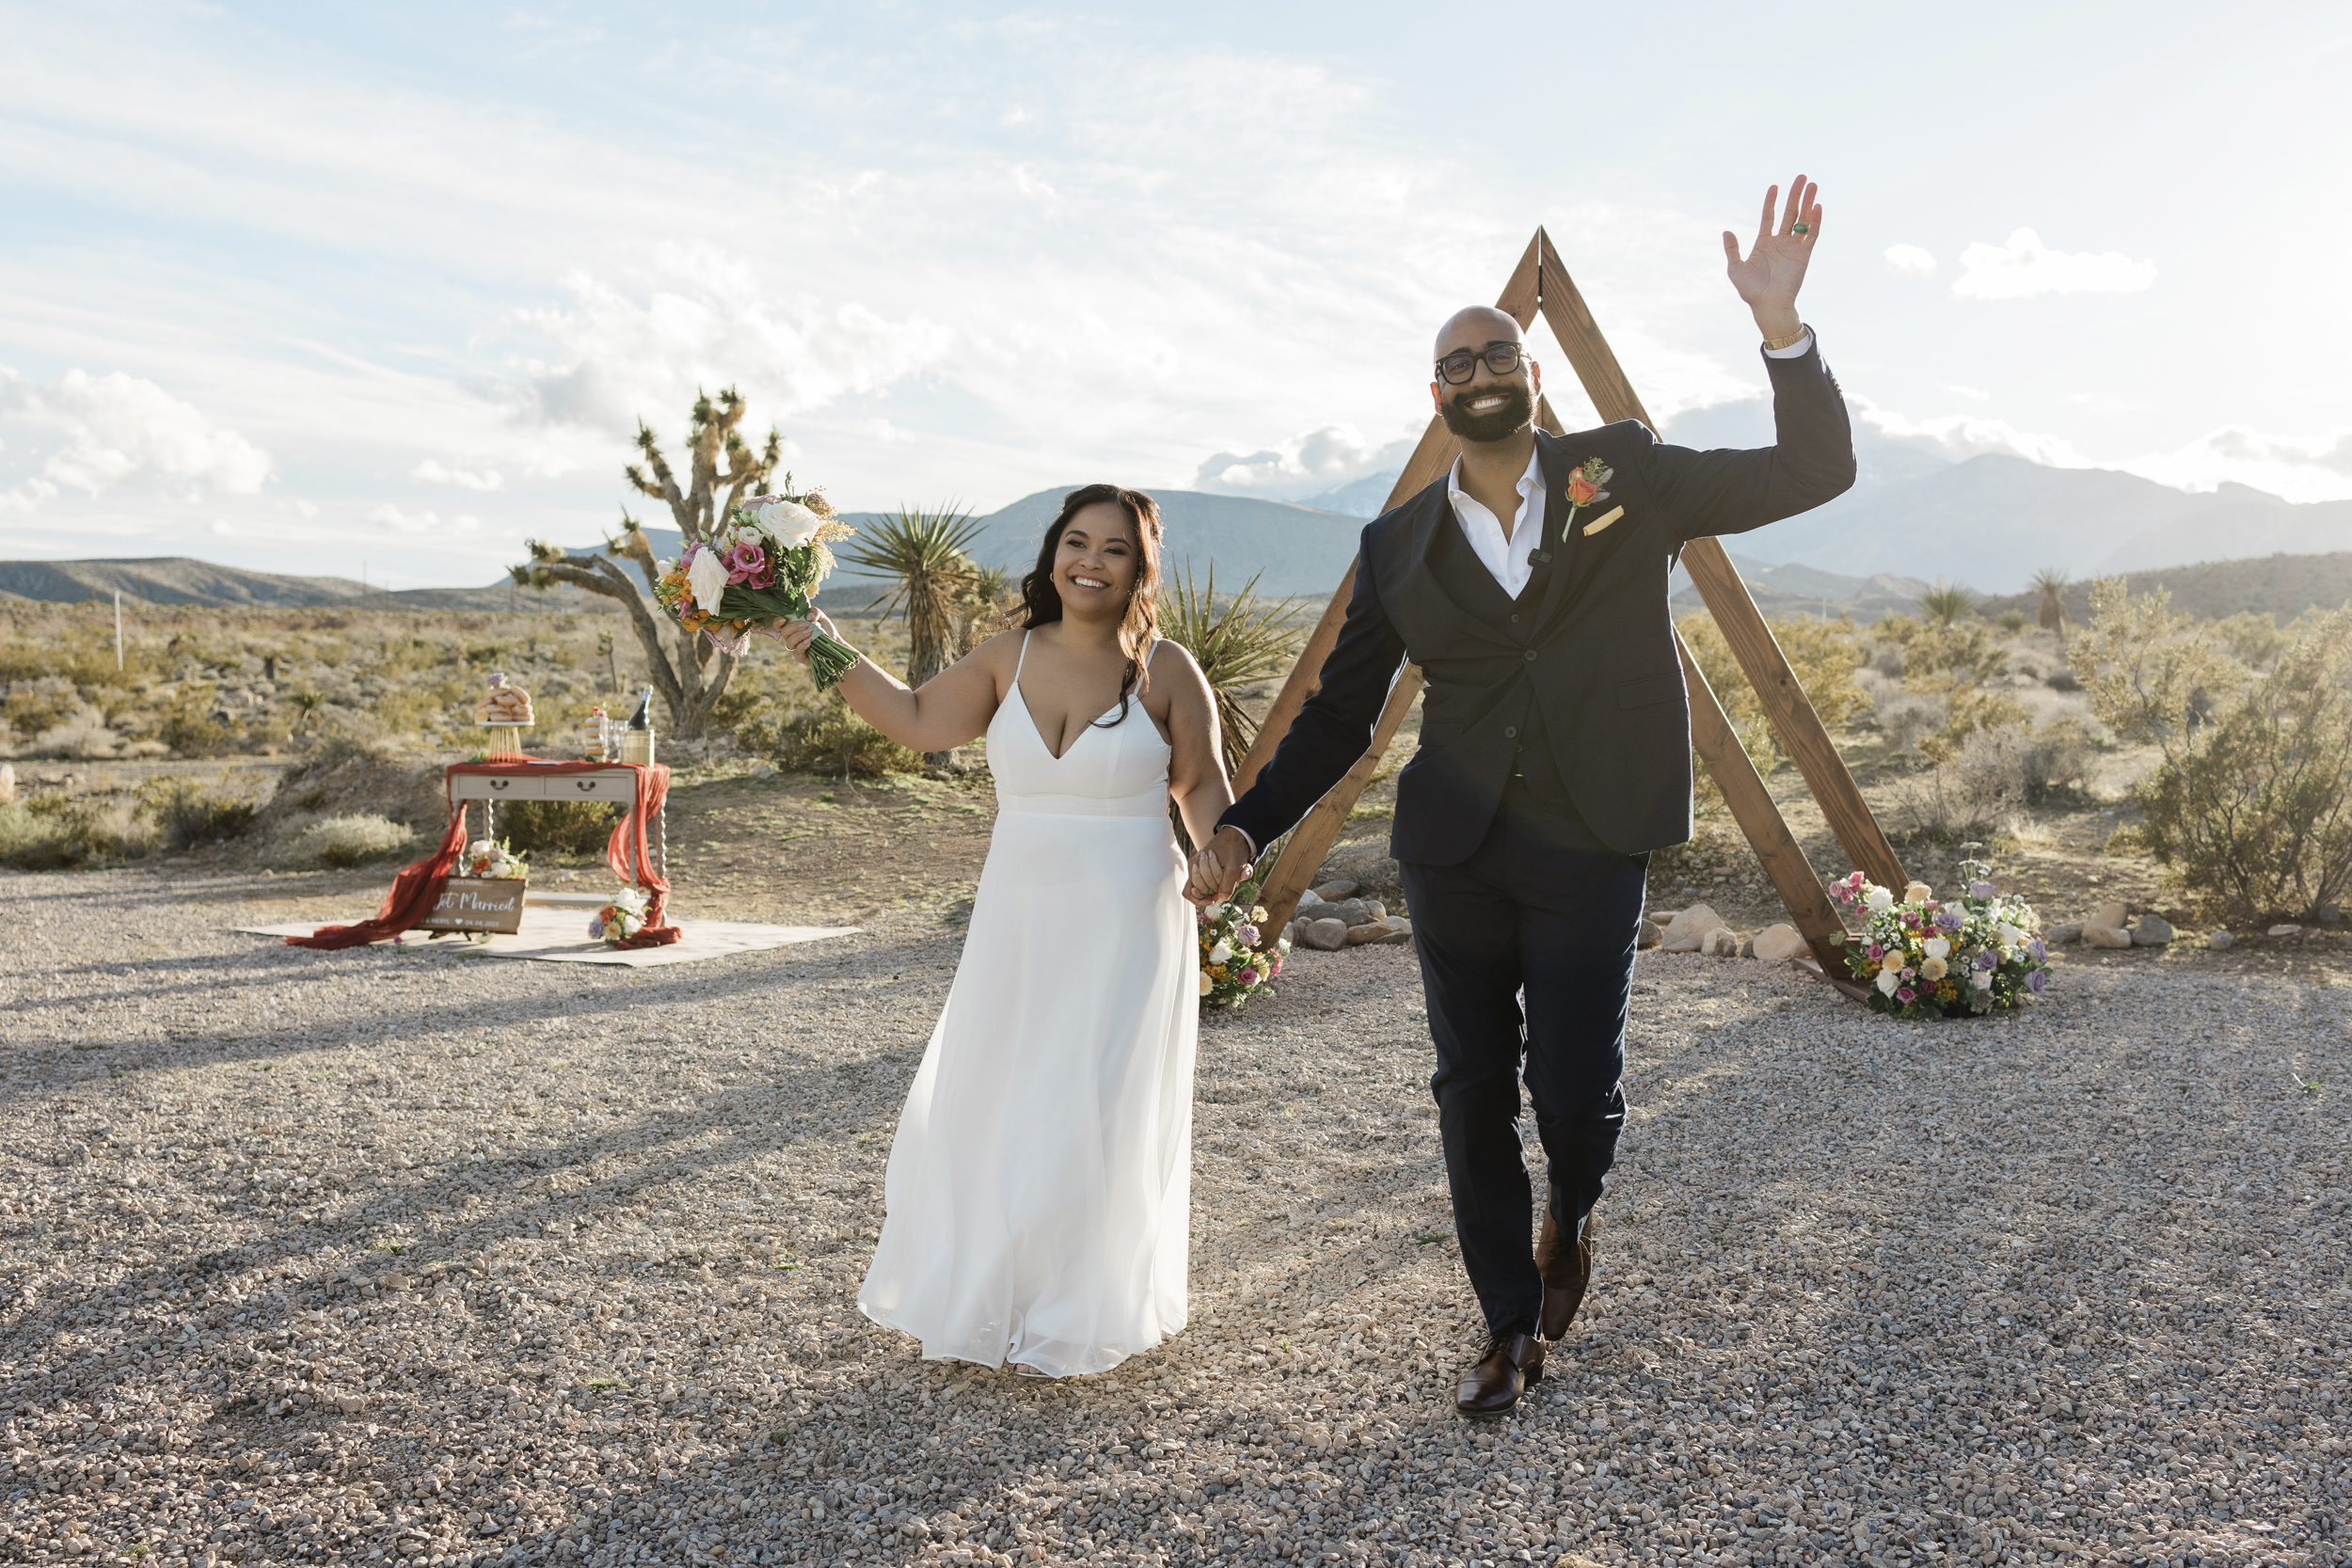 Desert Love Venue Shines as a Wild New Spot for Vegas Weddings and Elopements